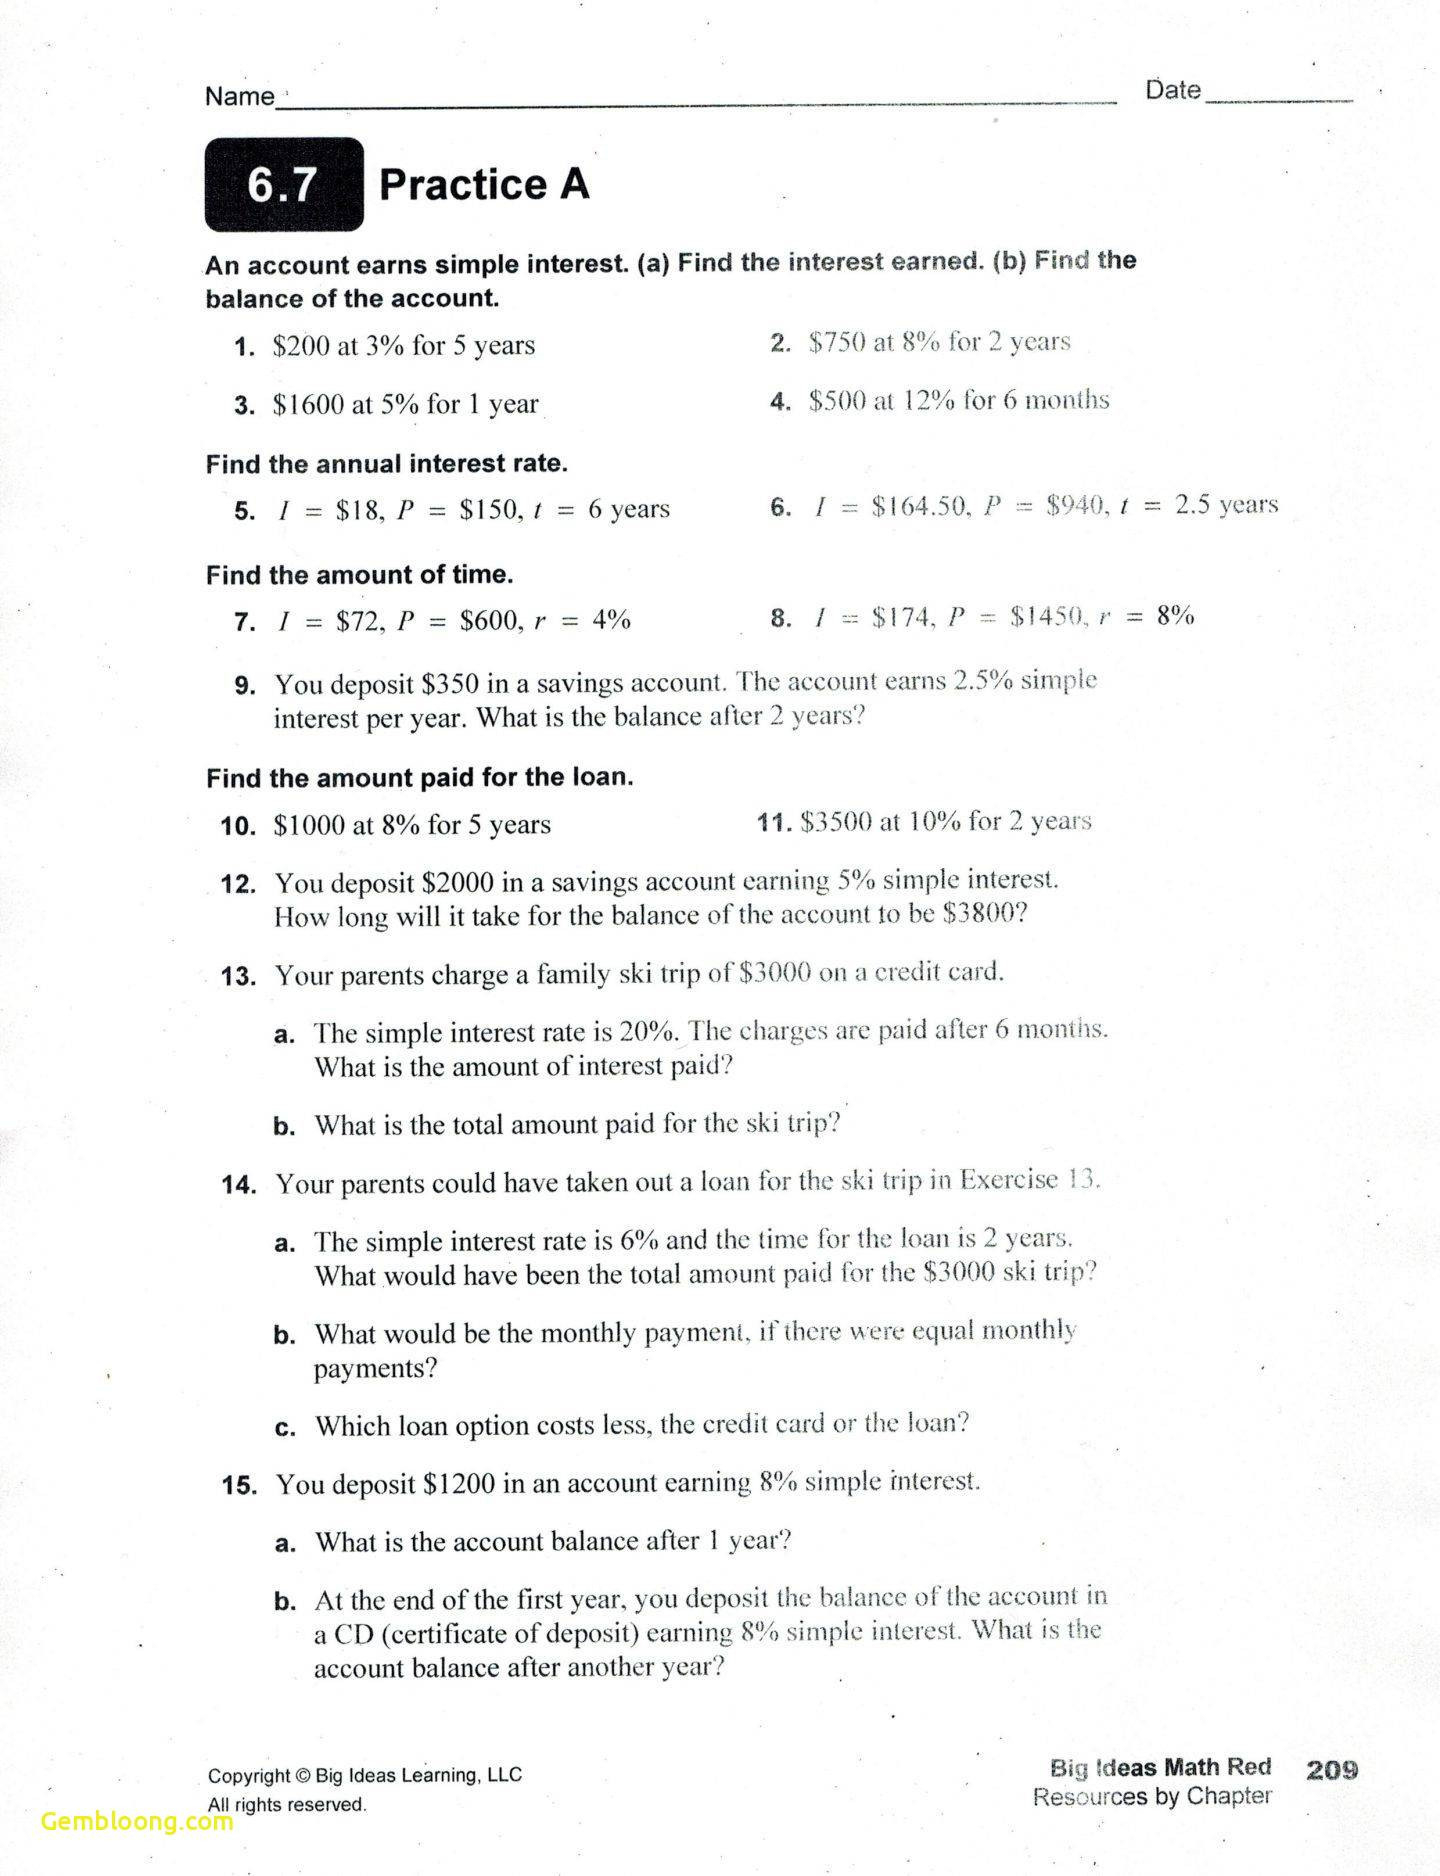 compound-interest-and-e-worksheet-answers-db-excel